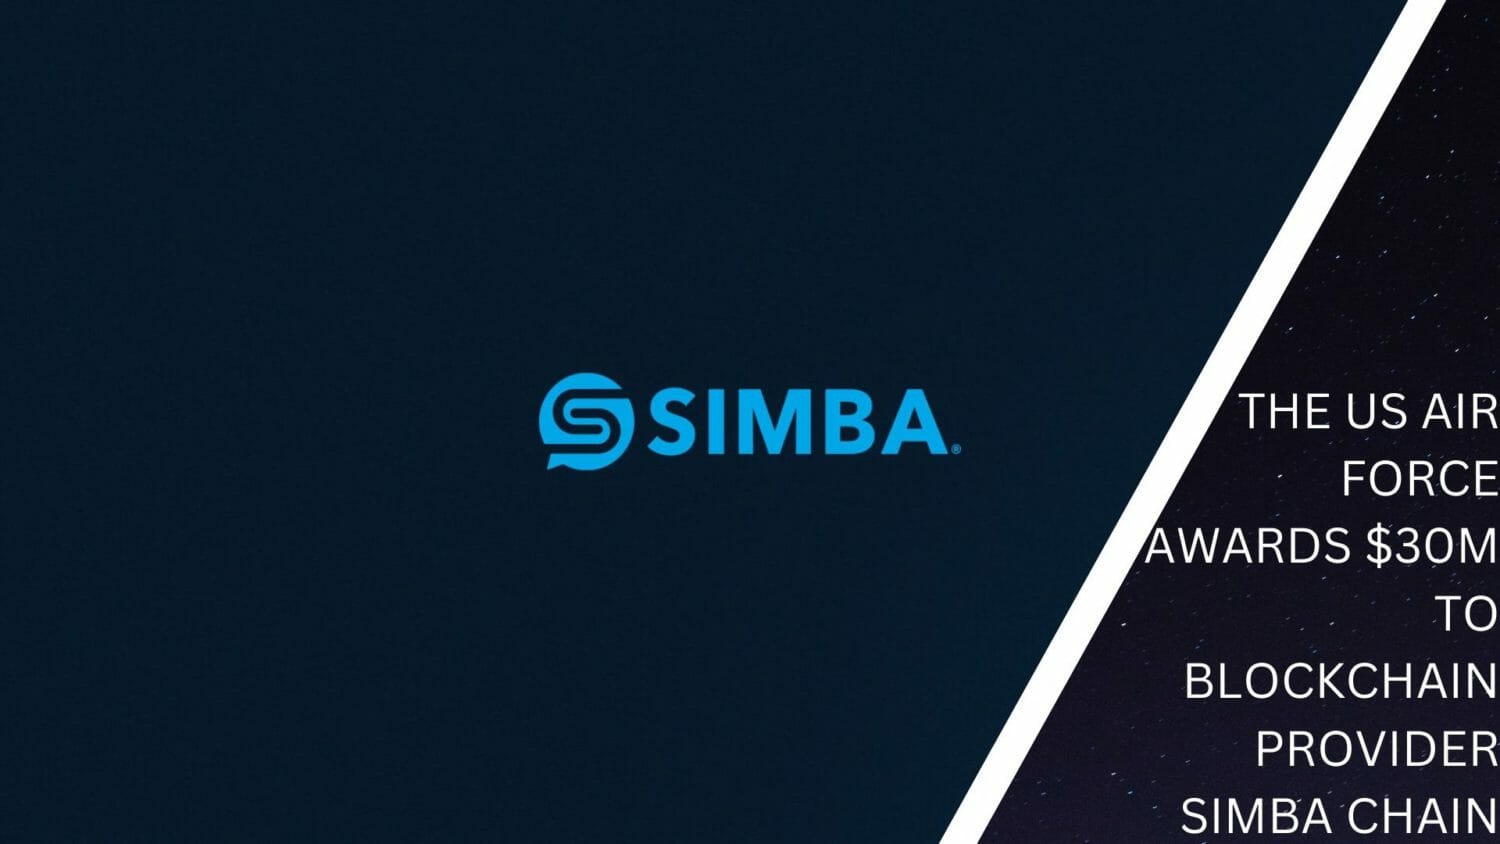 The Us Air Force Awards $30M To Blockchain Provider Simba Chain